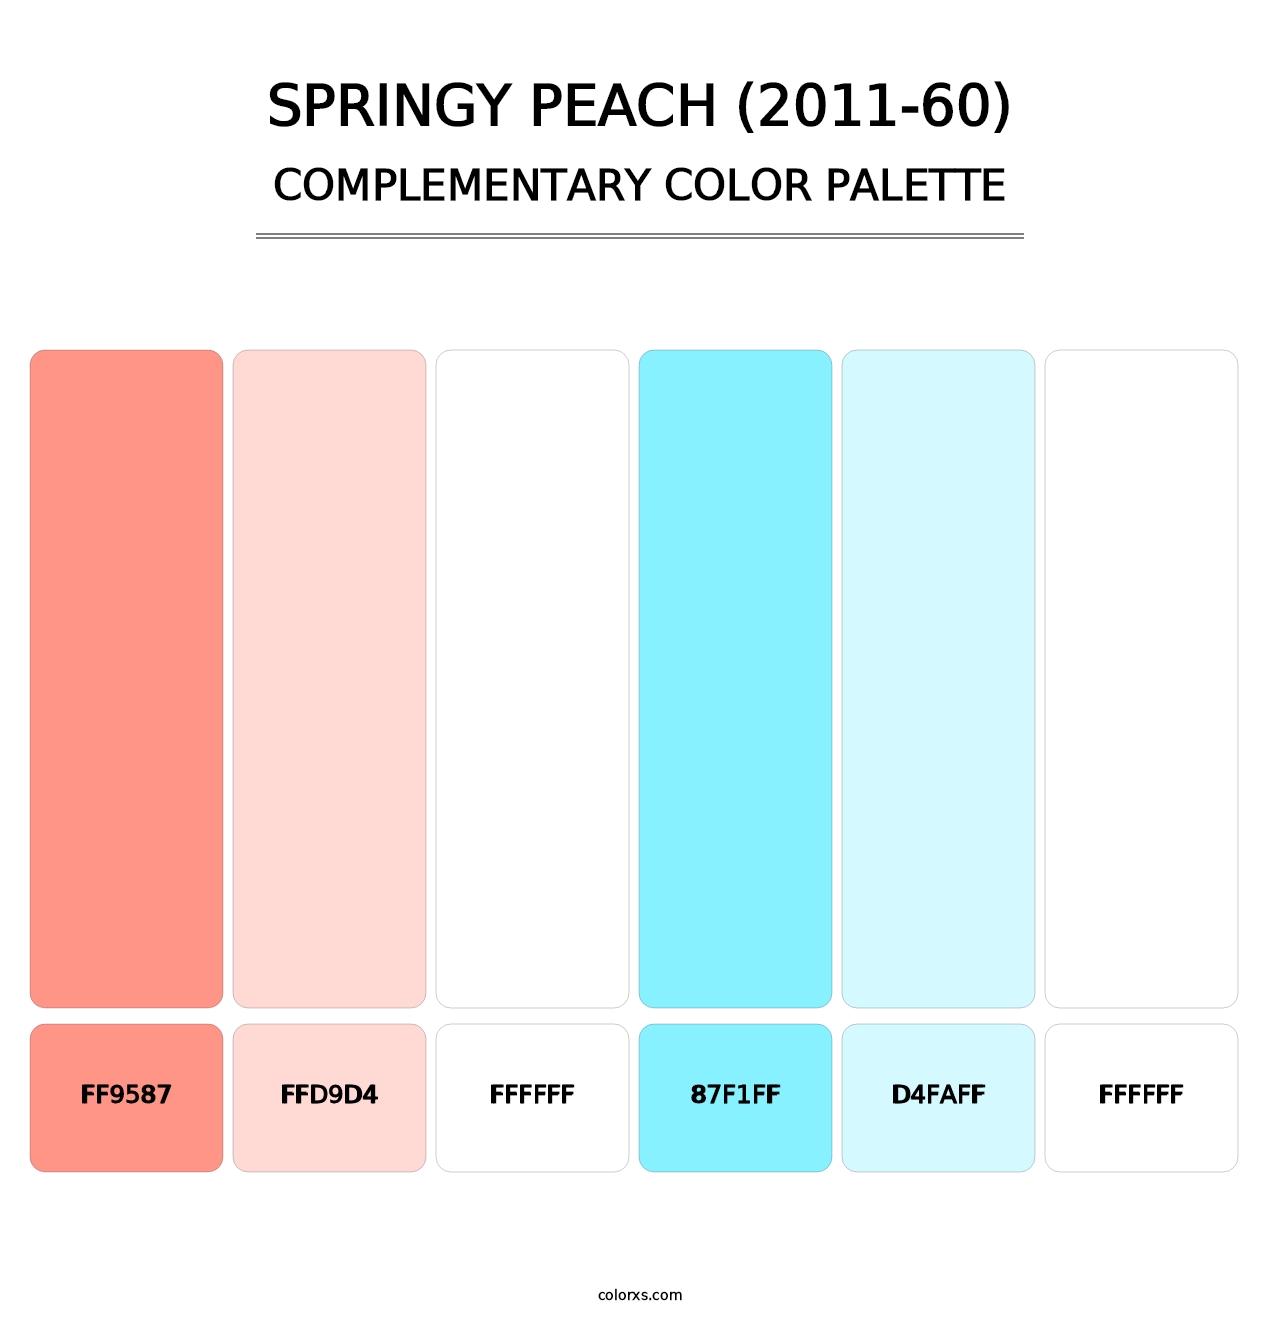 Springy Peach (2011-60) - Complementary Color Palette